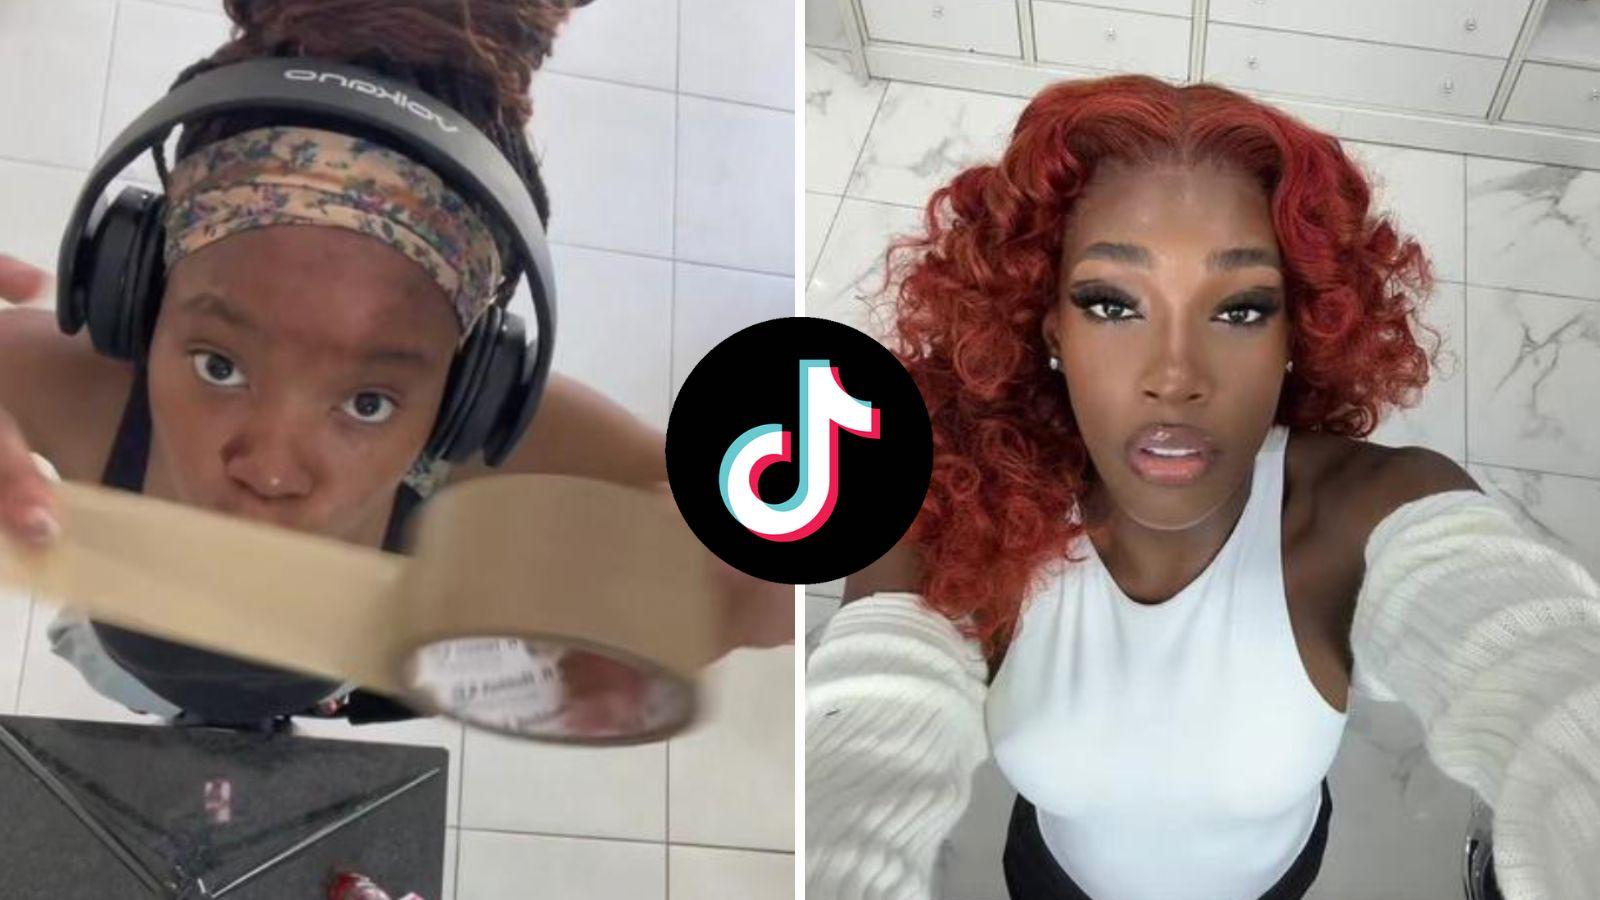 What is TikTok's 'Phone Ceiling' challenge? Viral trend explained